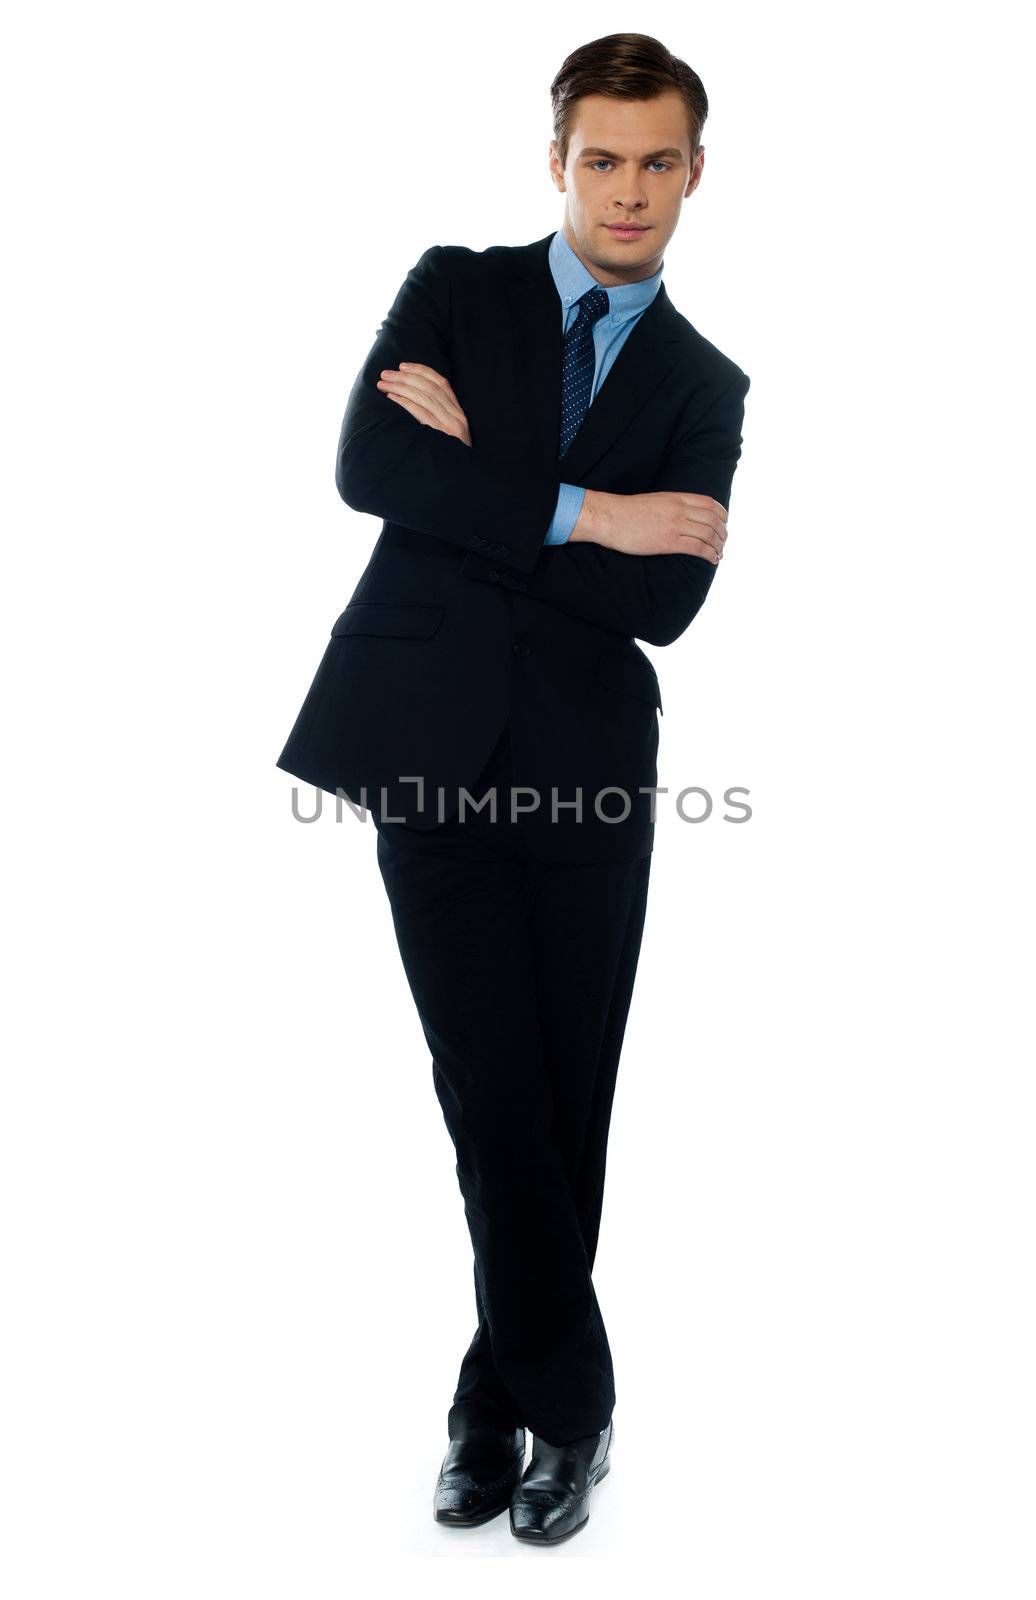 Young buisnessman tilting and smiling against white background